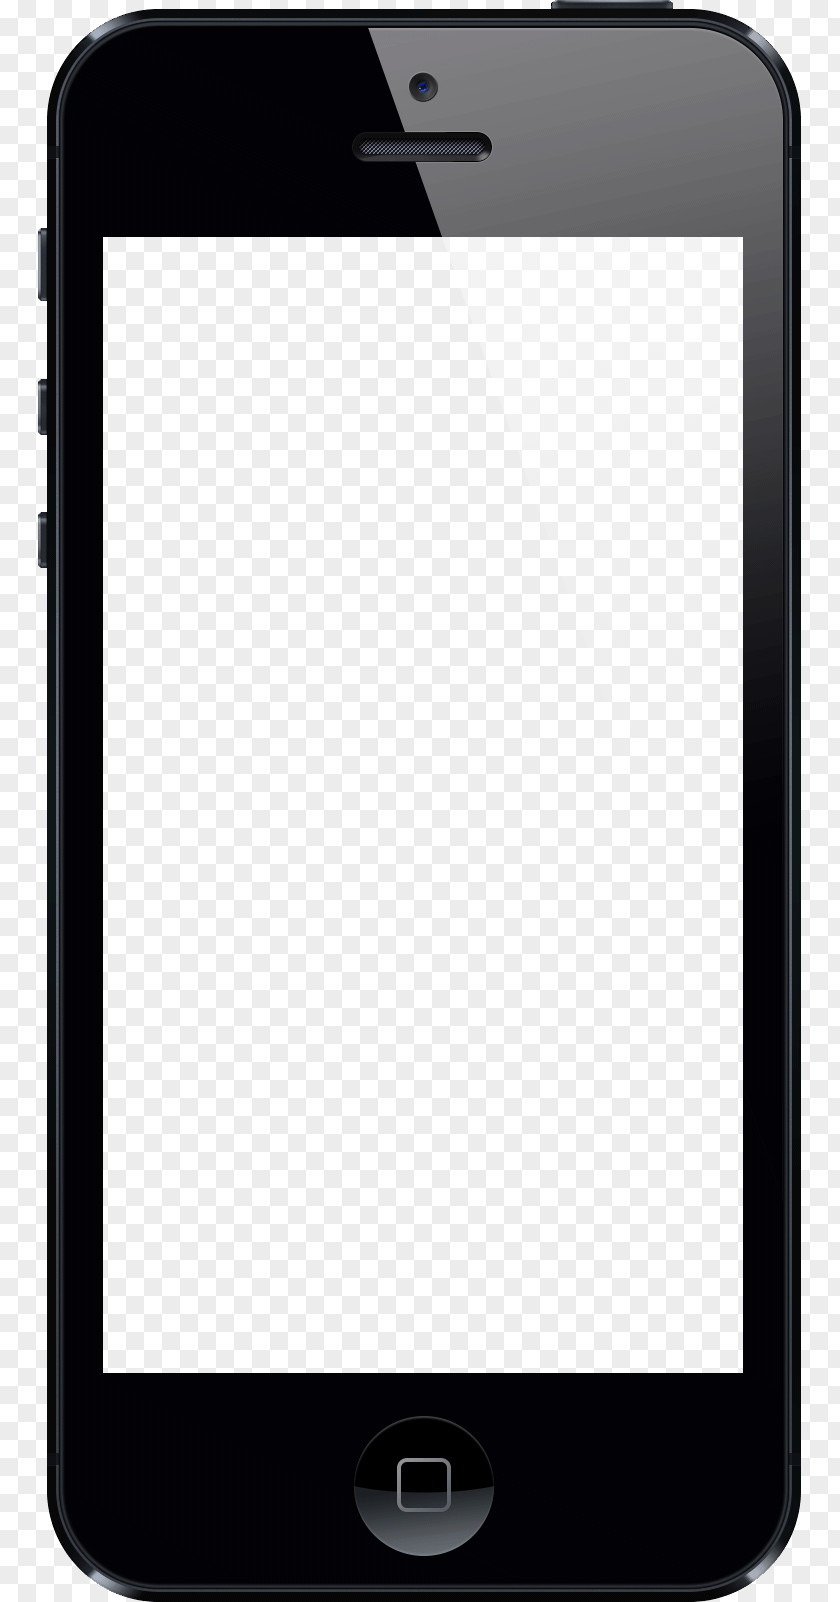 Smartphone Transparent Image IPhone 4S 5s IOS Jailbreaking Cydia PNG